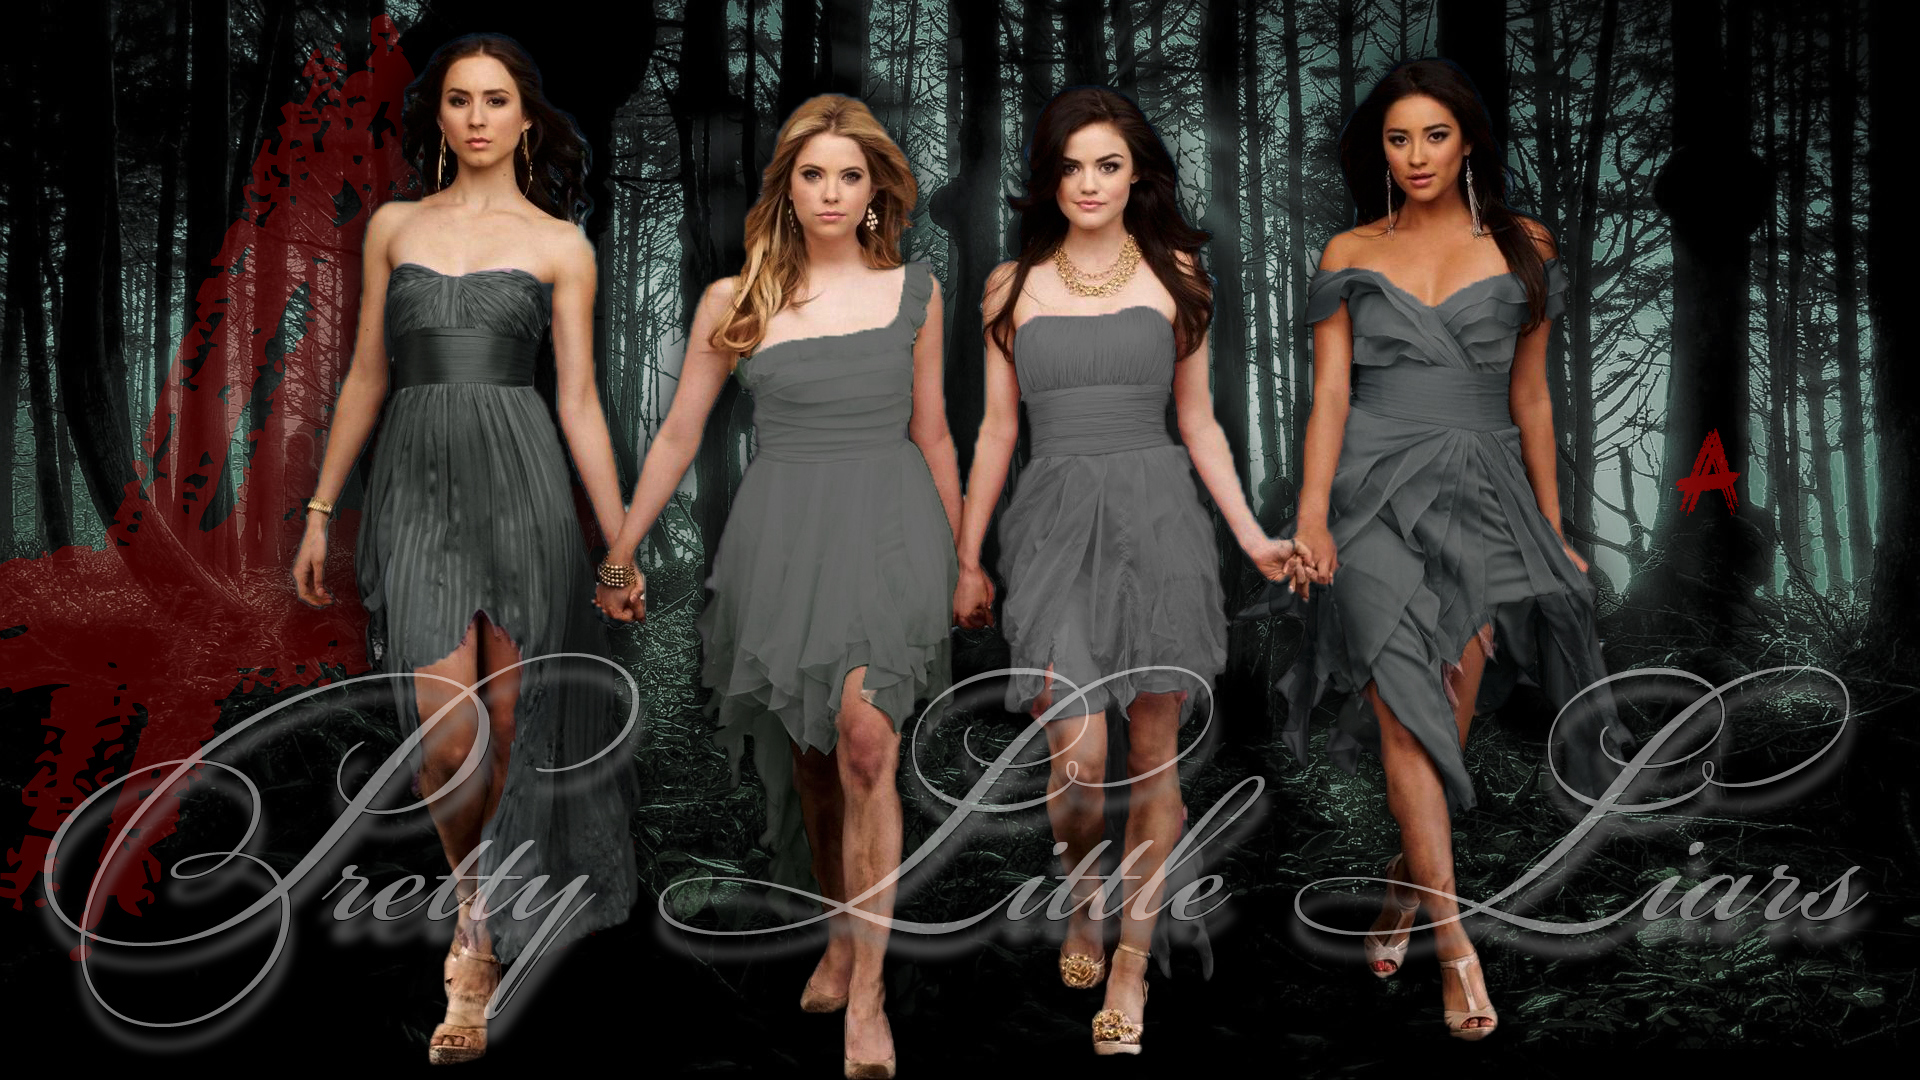 Pretty Little Liars Wallpaper High Resolution And Quality